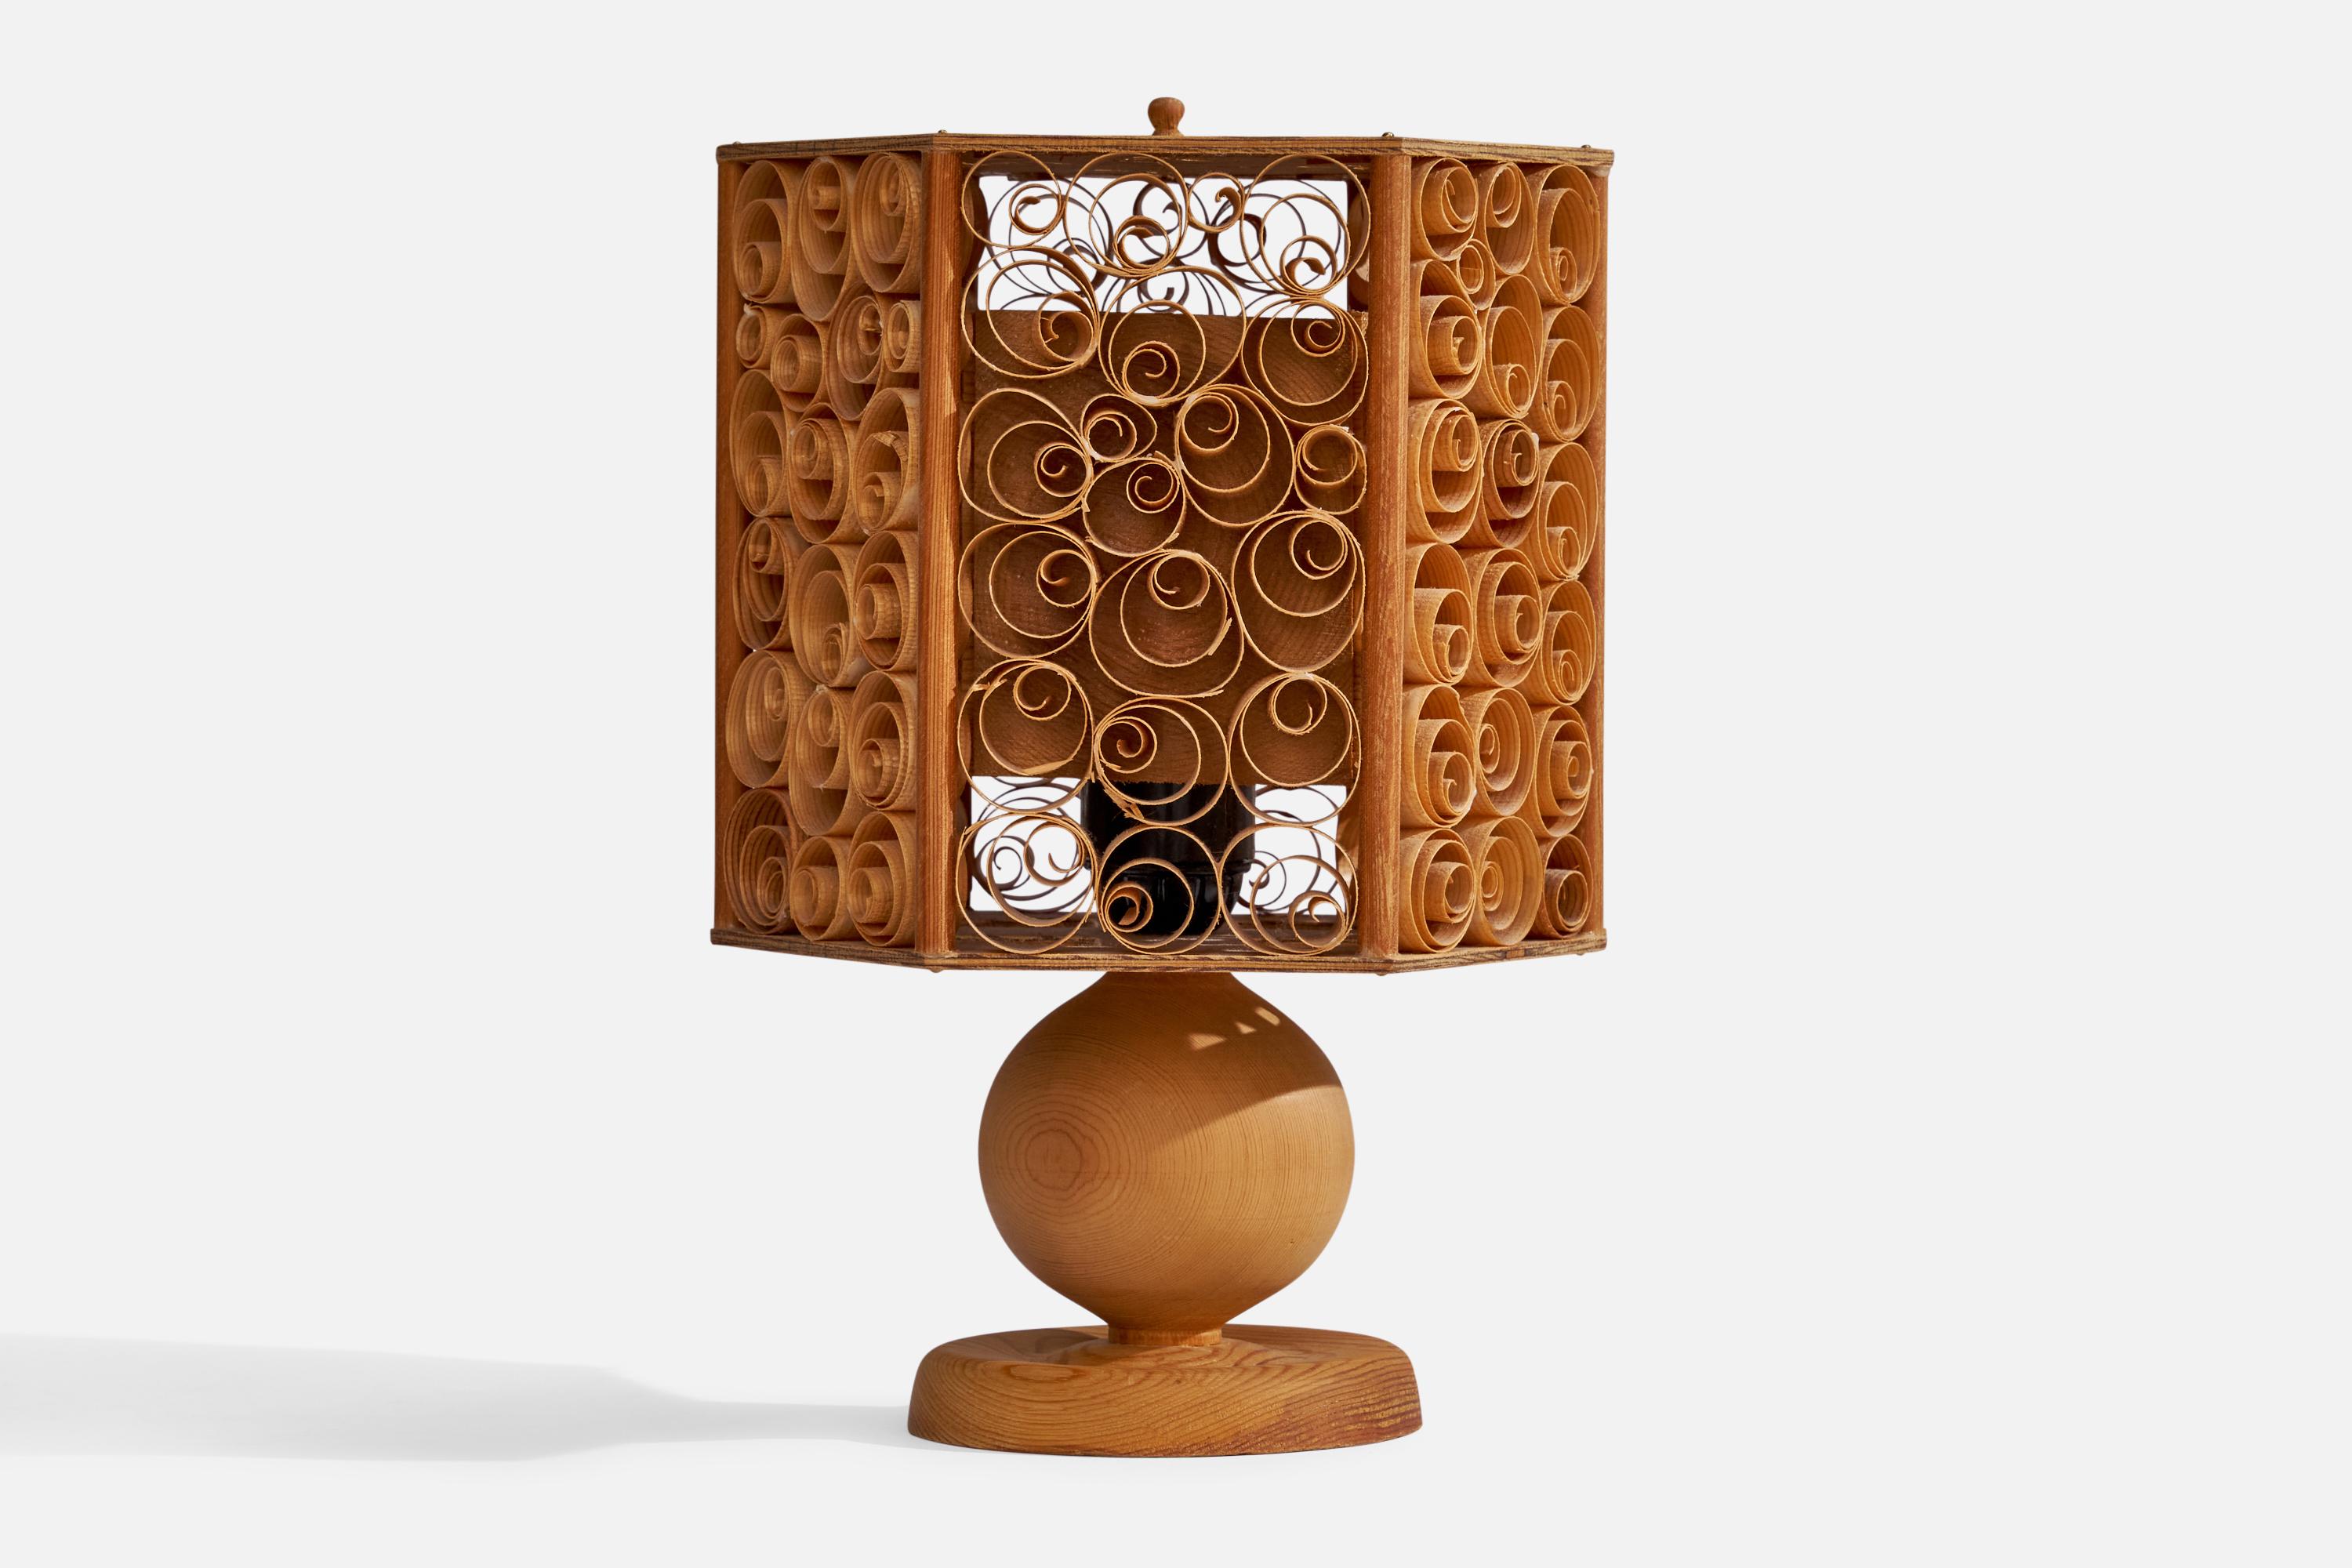 A pine and pine veneer table table lamp designed and produced in Sweden, 1970s.

Overall Dimensions (inches): 11.25”  H x 7”  W x 7”  D
Stated dimensions include shade.
Bulb Specifications: E-26 Bulb
Number of Sockets: 1
All lighting will be